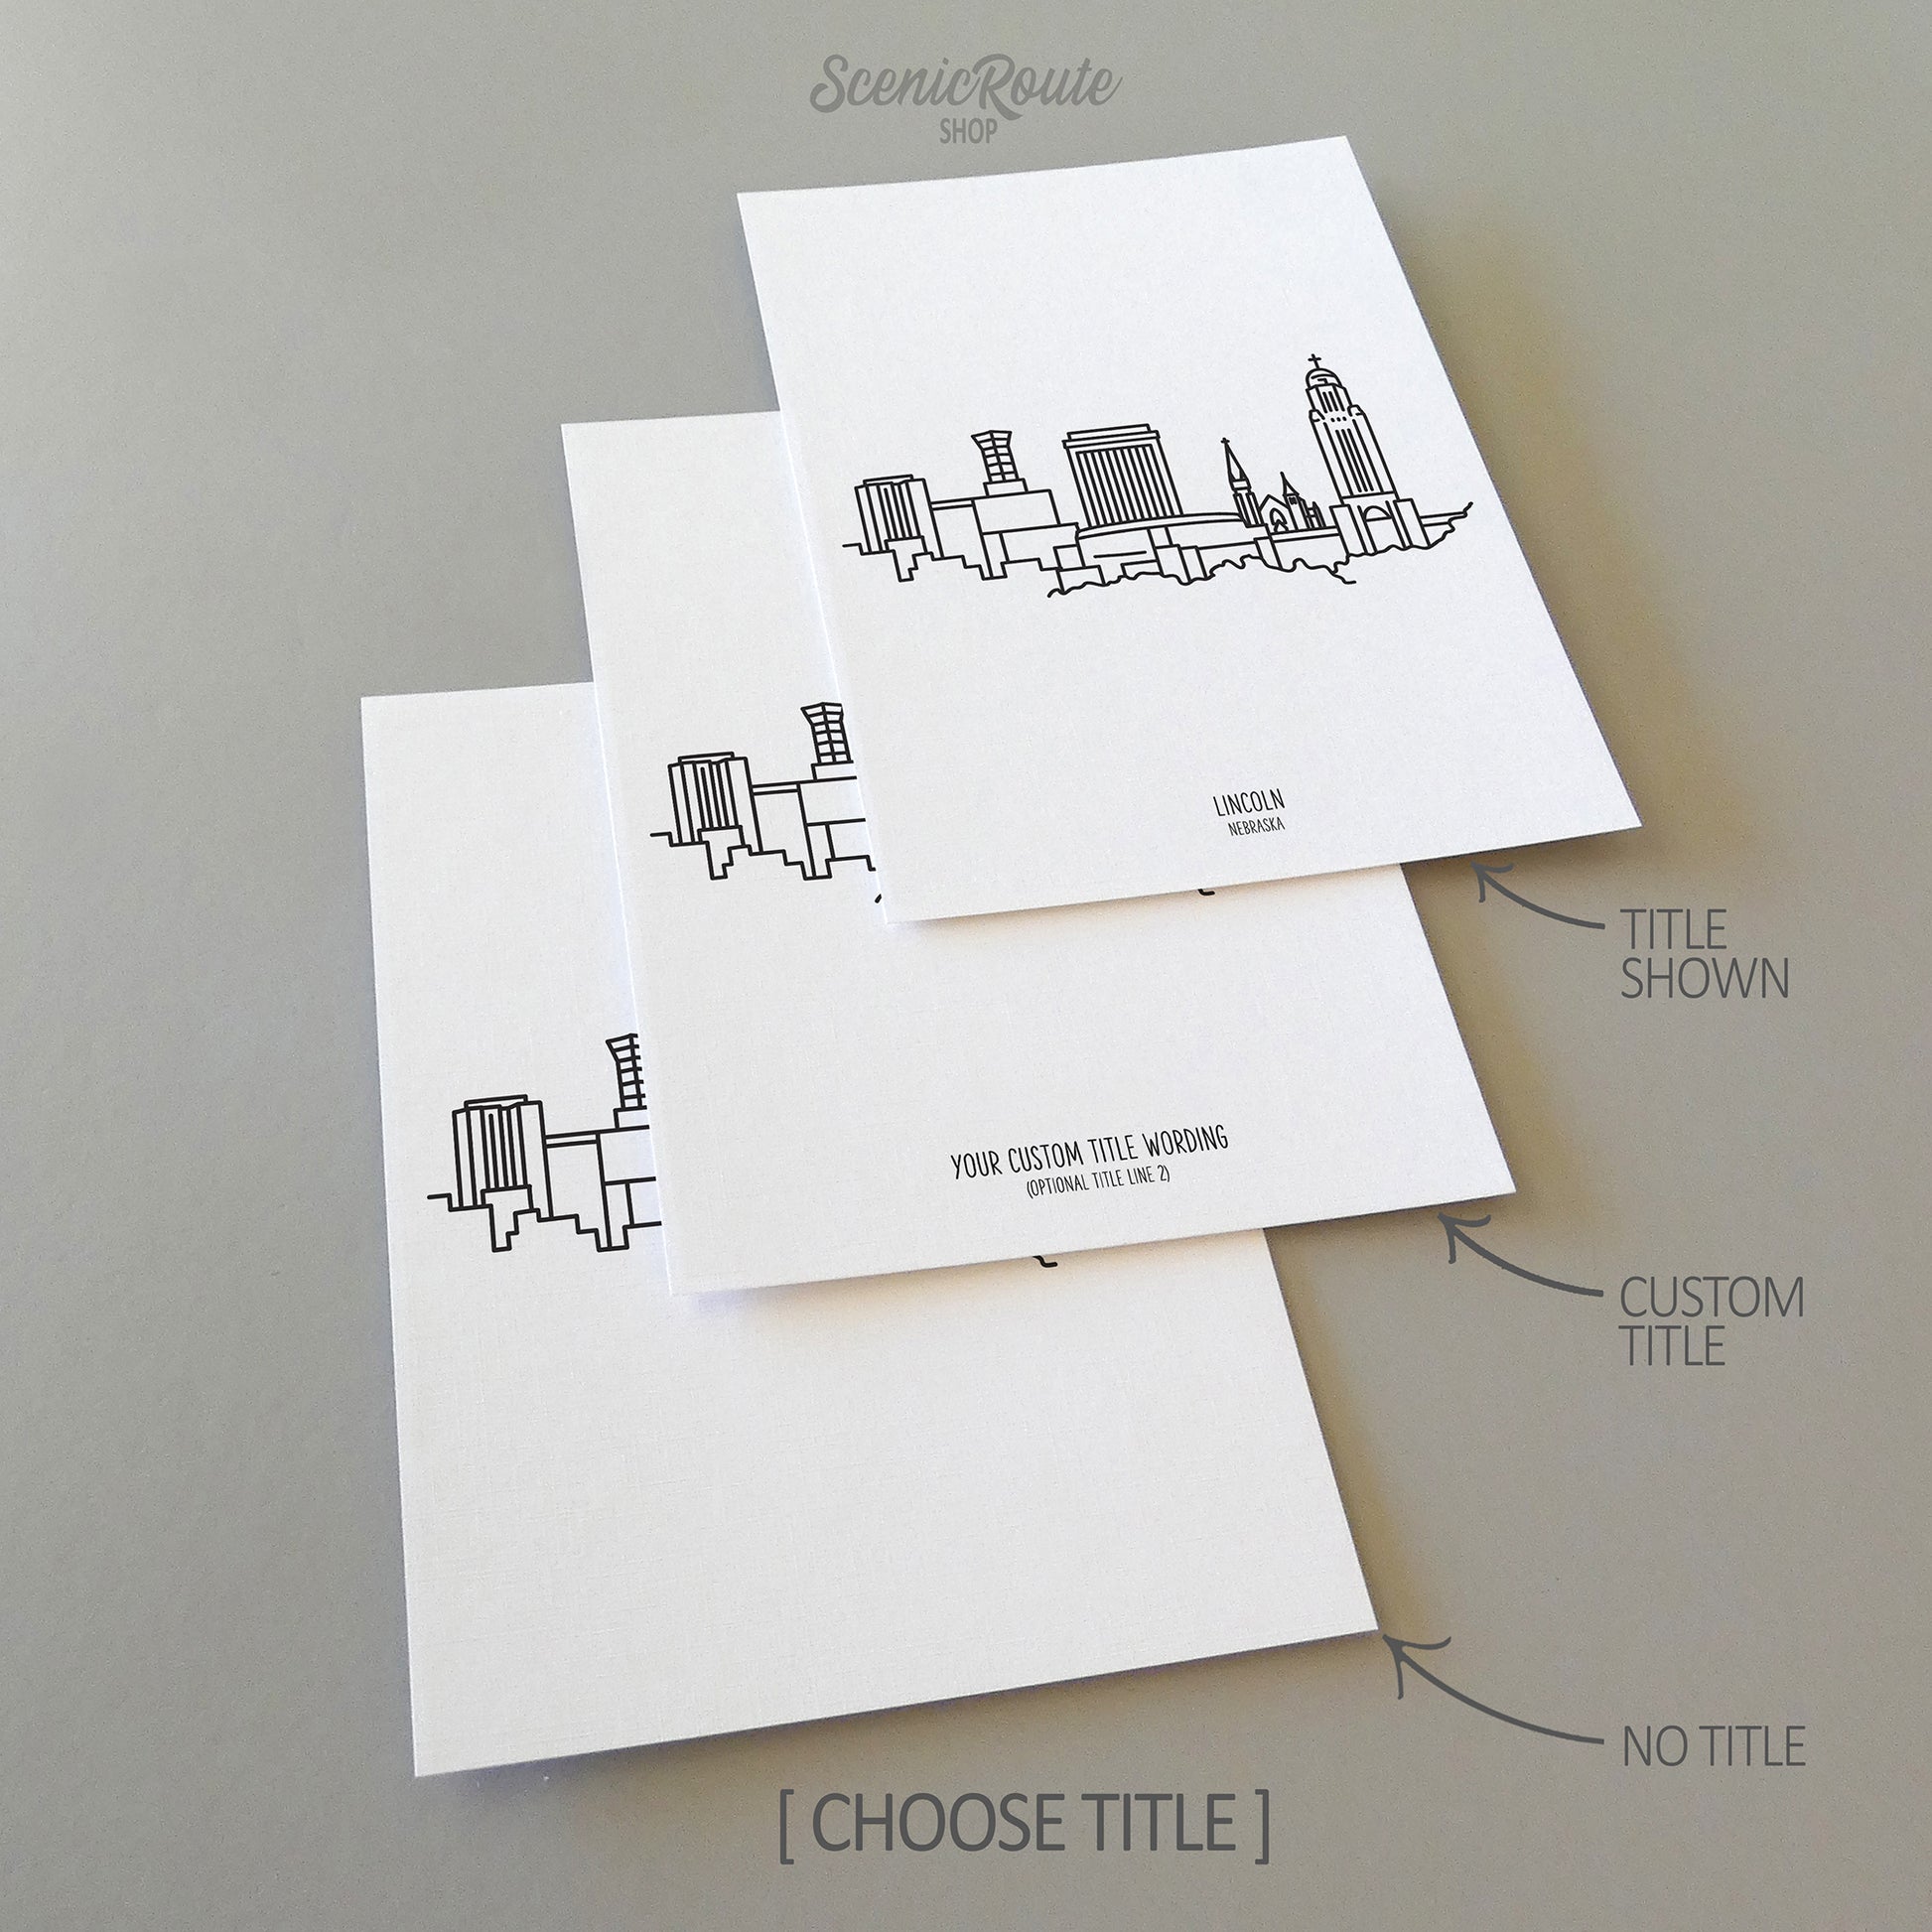 Three line art drawings of the Lincoln Nebraska Skyline on white linen paper with a gray background. The pieces are shown with title options that can be chosen and personalized.